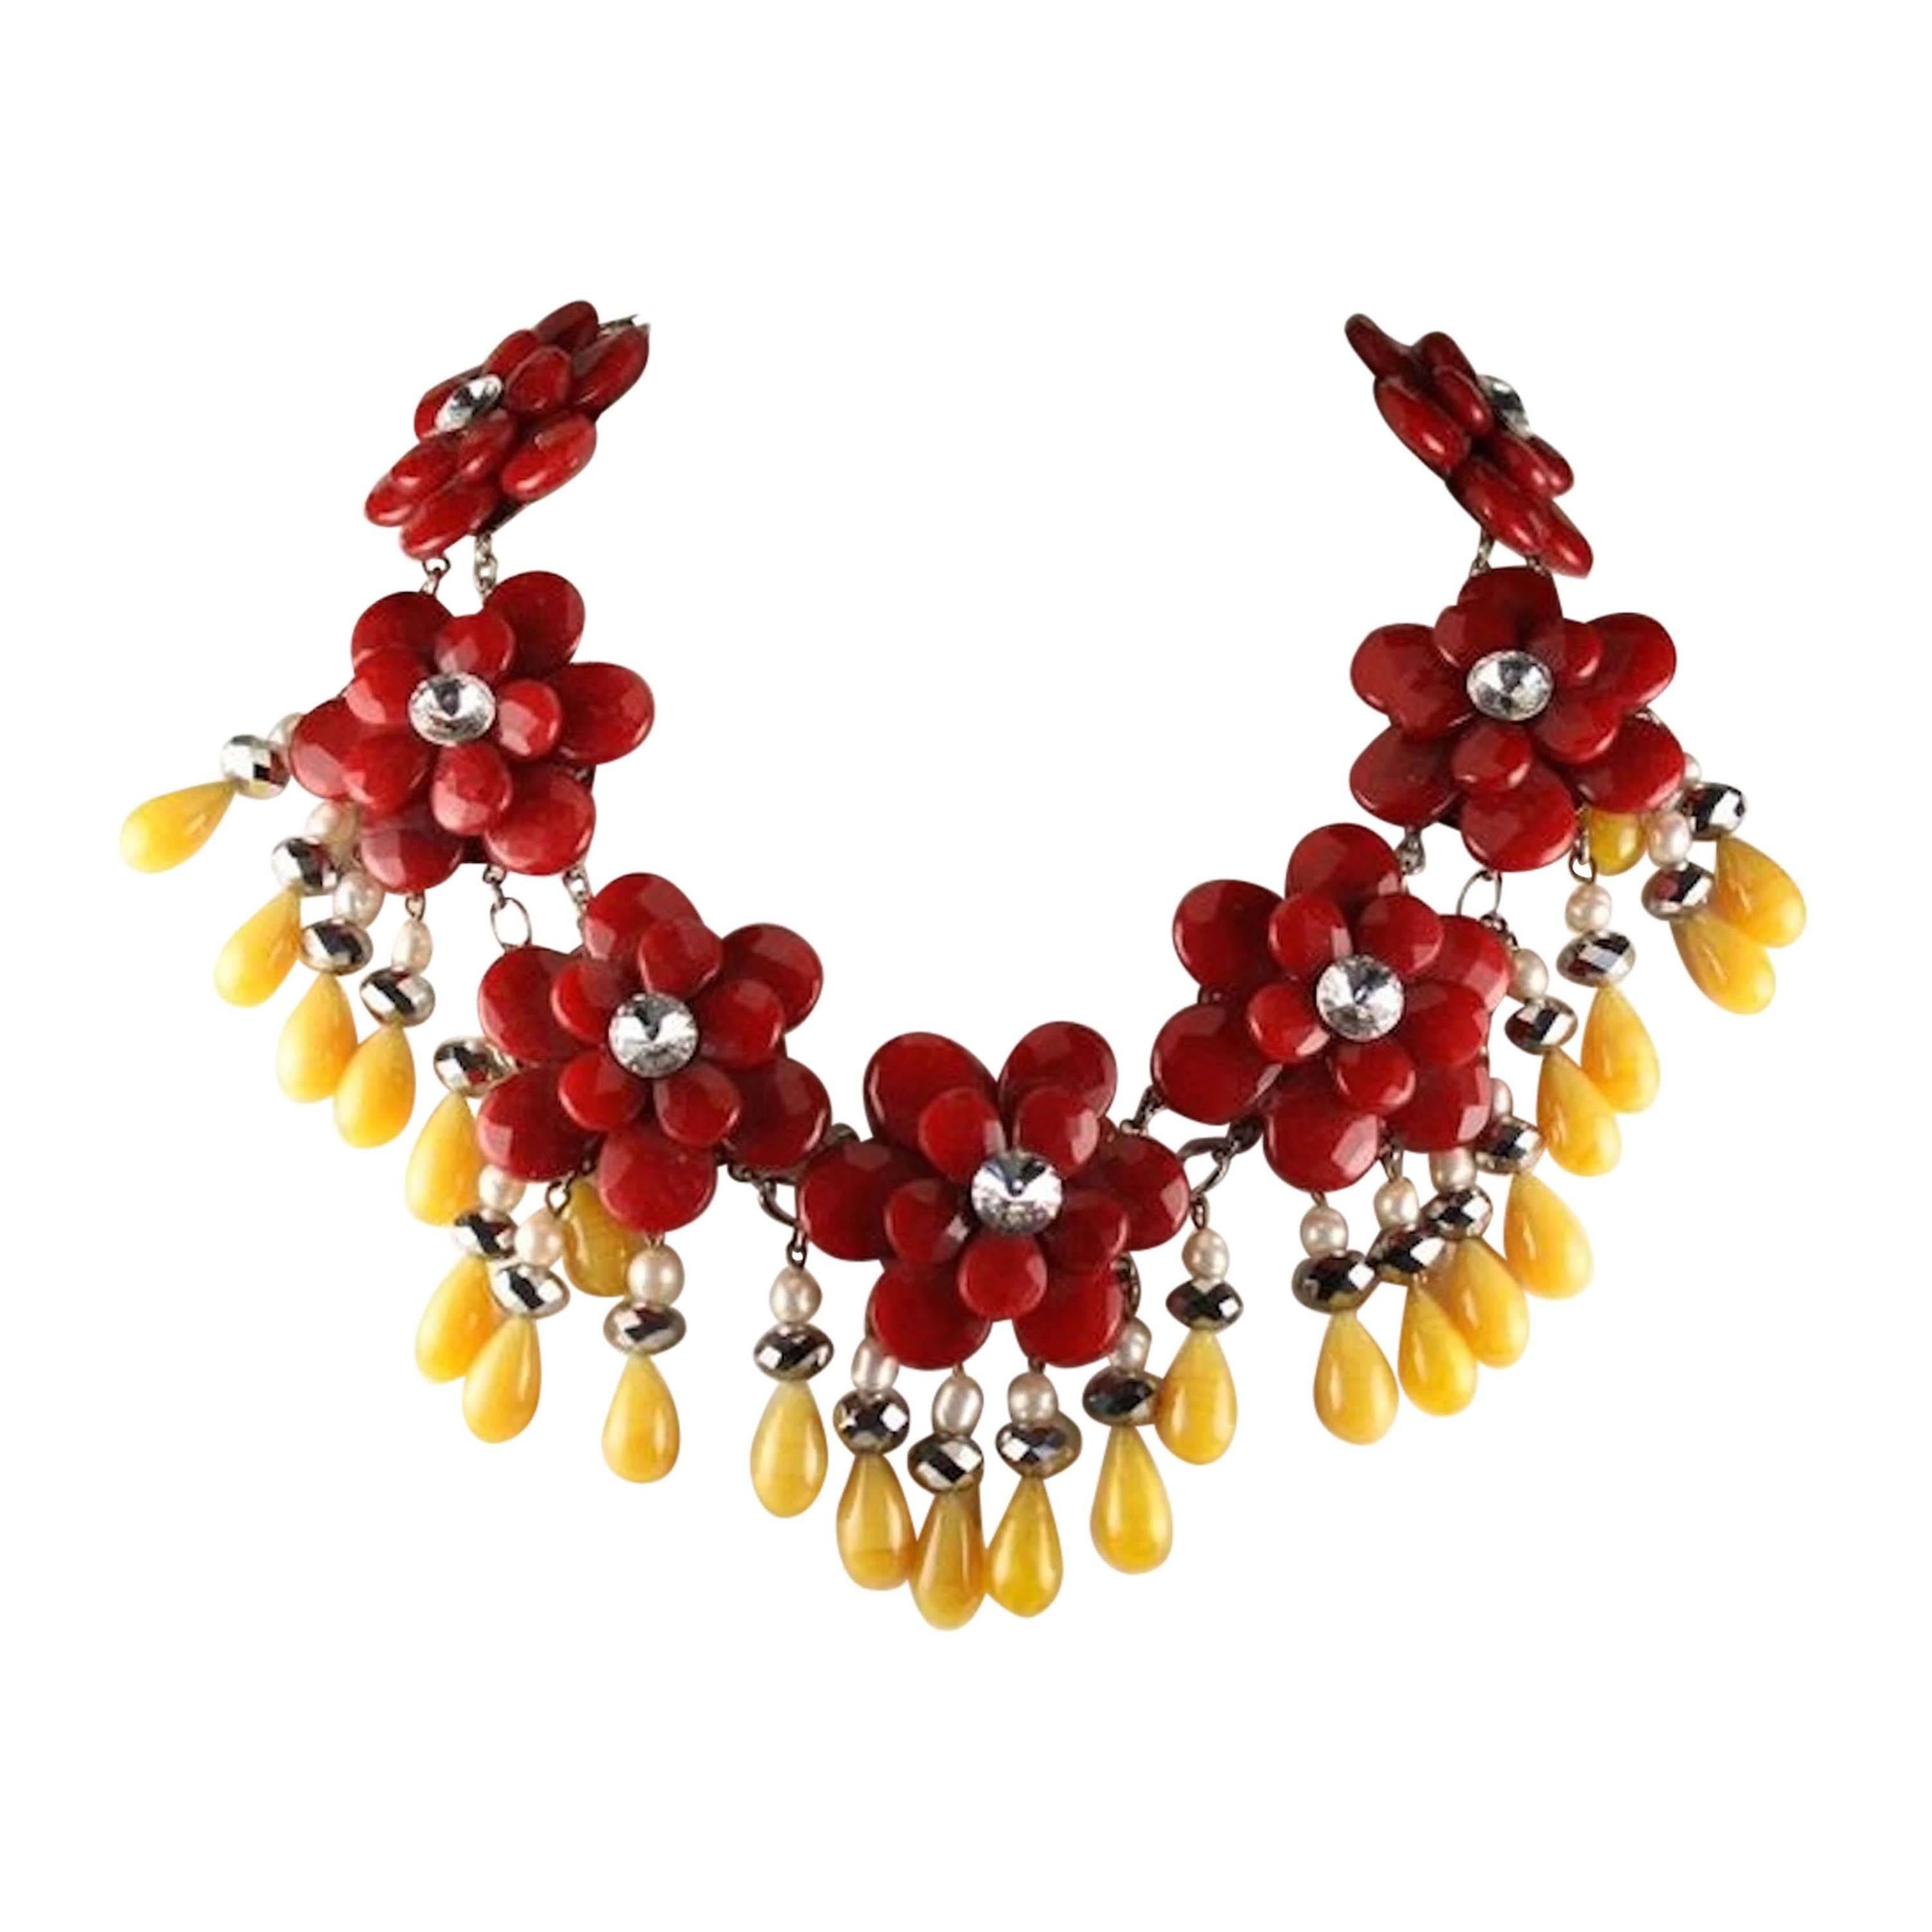 Francoise Montague Red and Yellow Agate Floral Motif Necklace